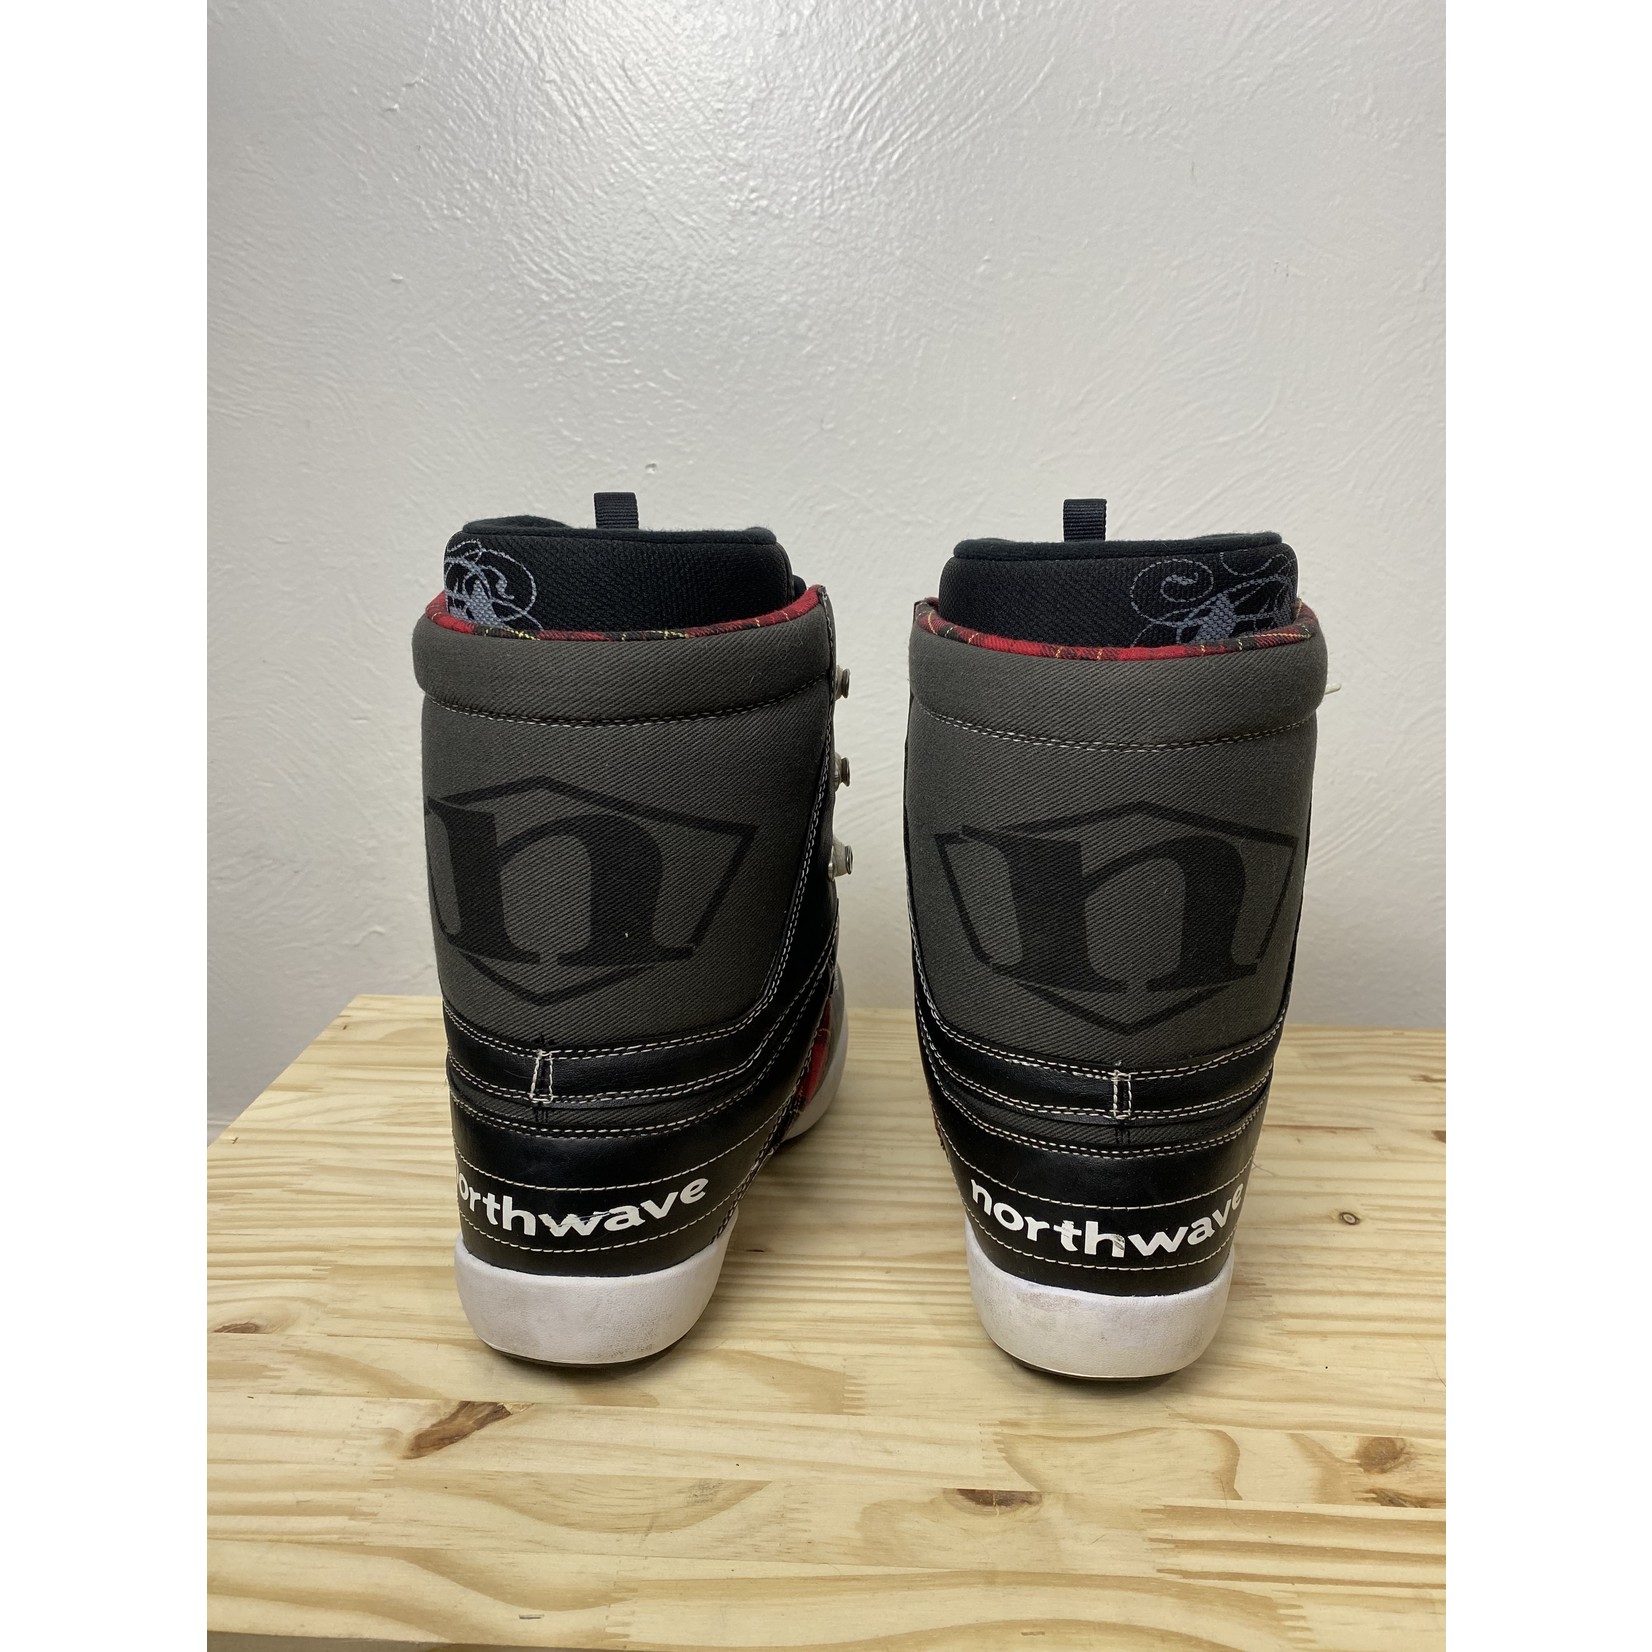 Northwave Northwave Snowboard Boots, Size 6, SOLD AS IS, NO REFUNDS OR EXCHANGES